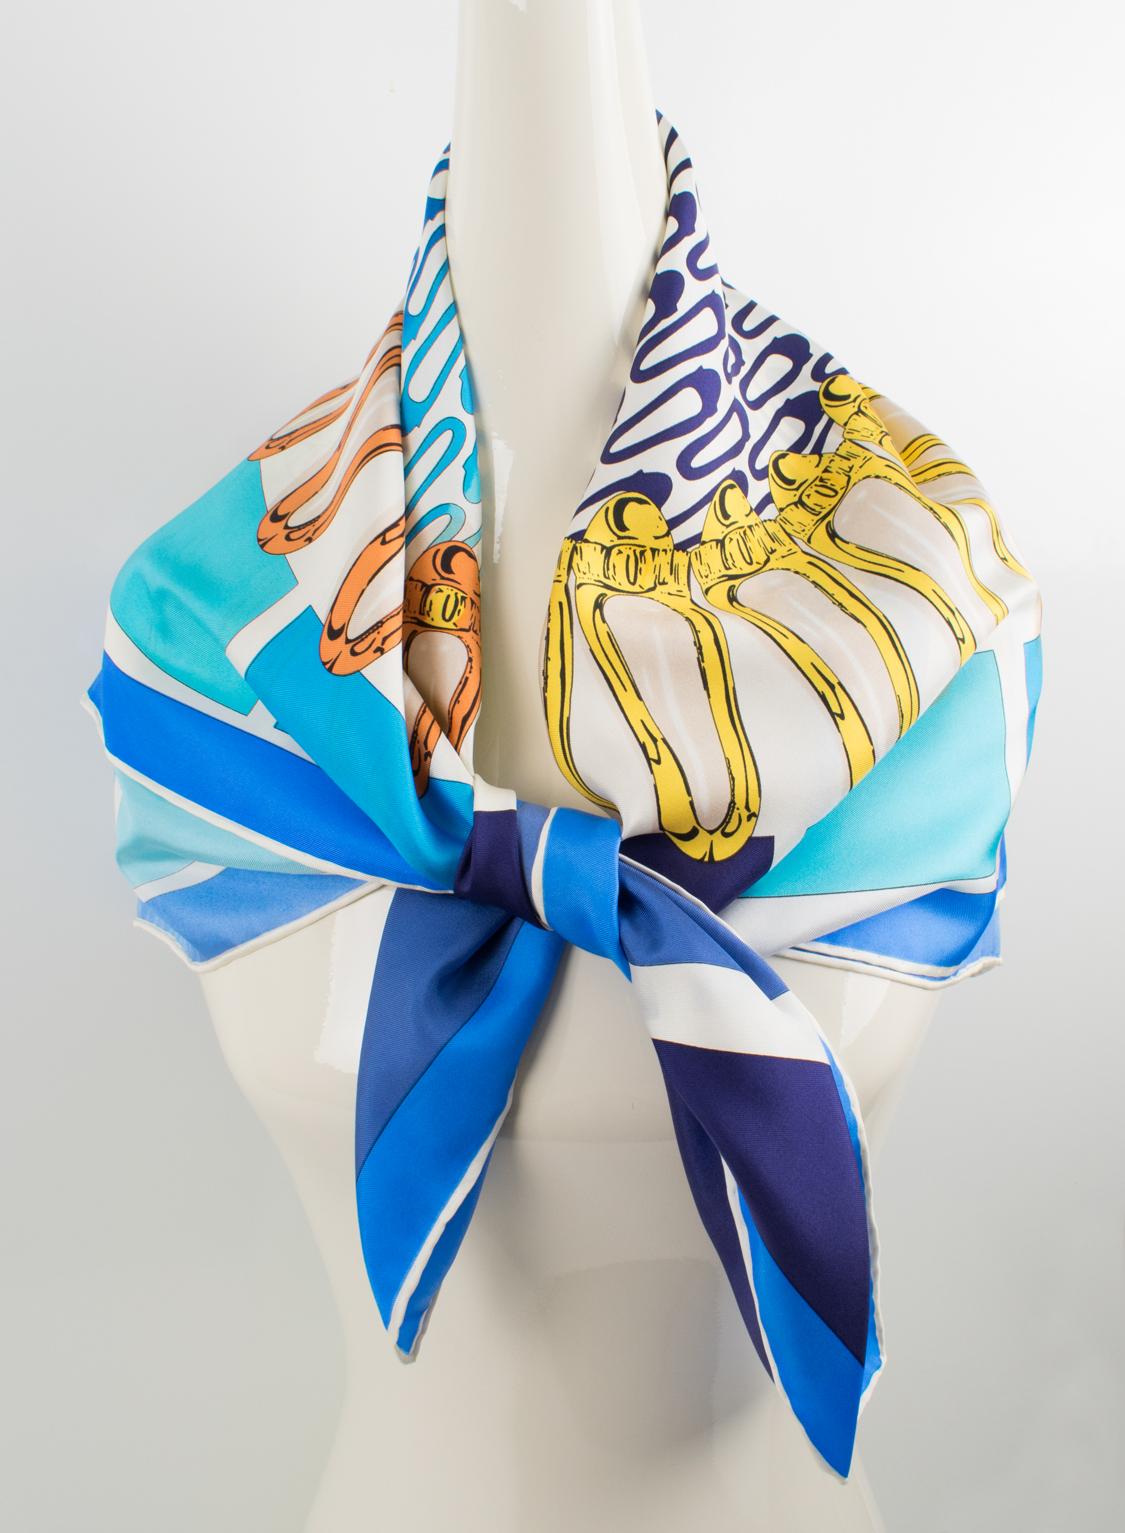 Refined silk scarf by Salvatore Ferragamo in blue hues and assorted colors featuring flat sleeper shoes design print. Salvatore Ferragamo's signature name on the middle center low. The colors are bright and vibrant with a combination of cerulean